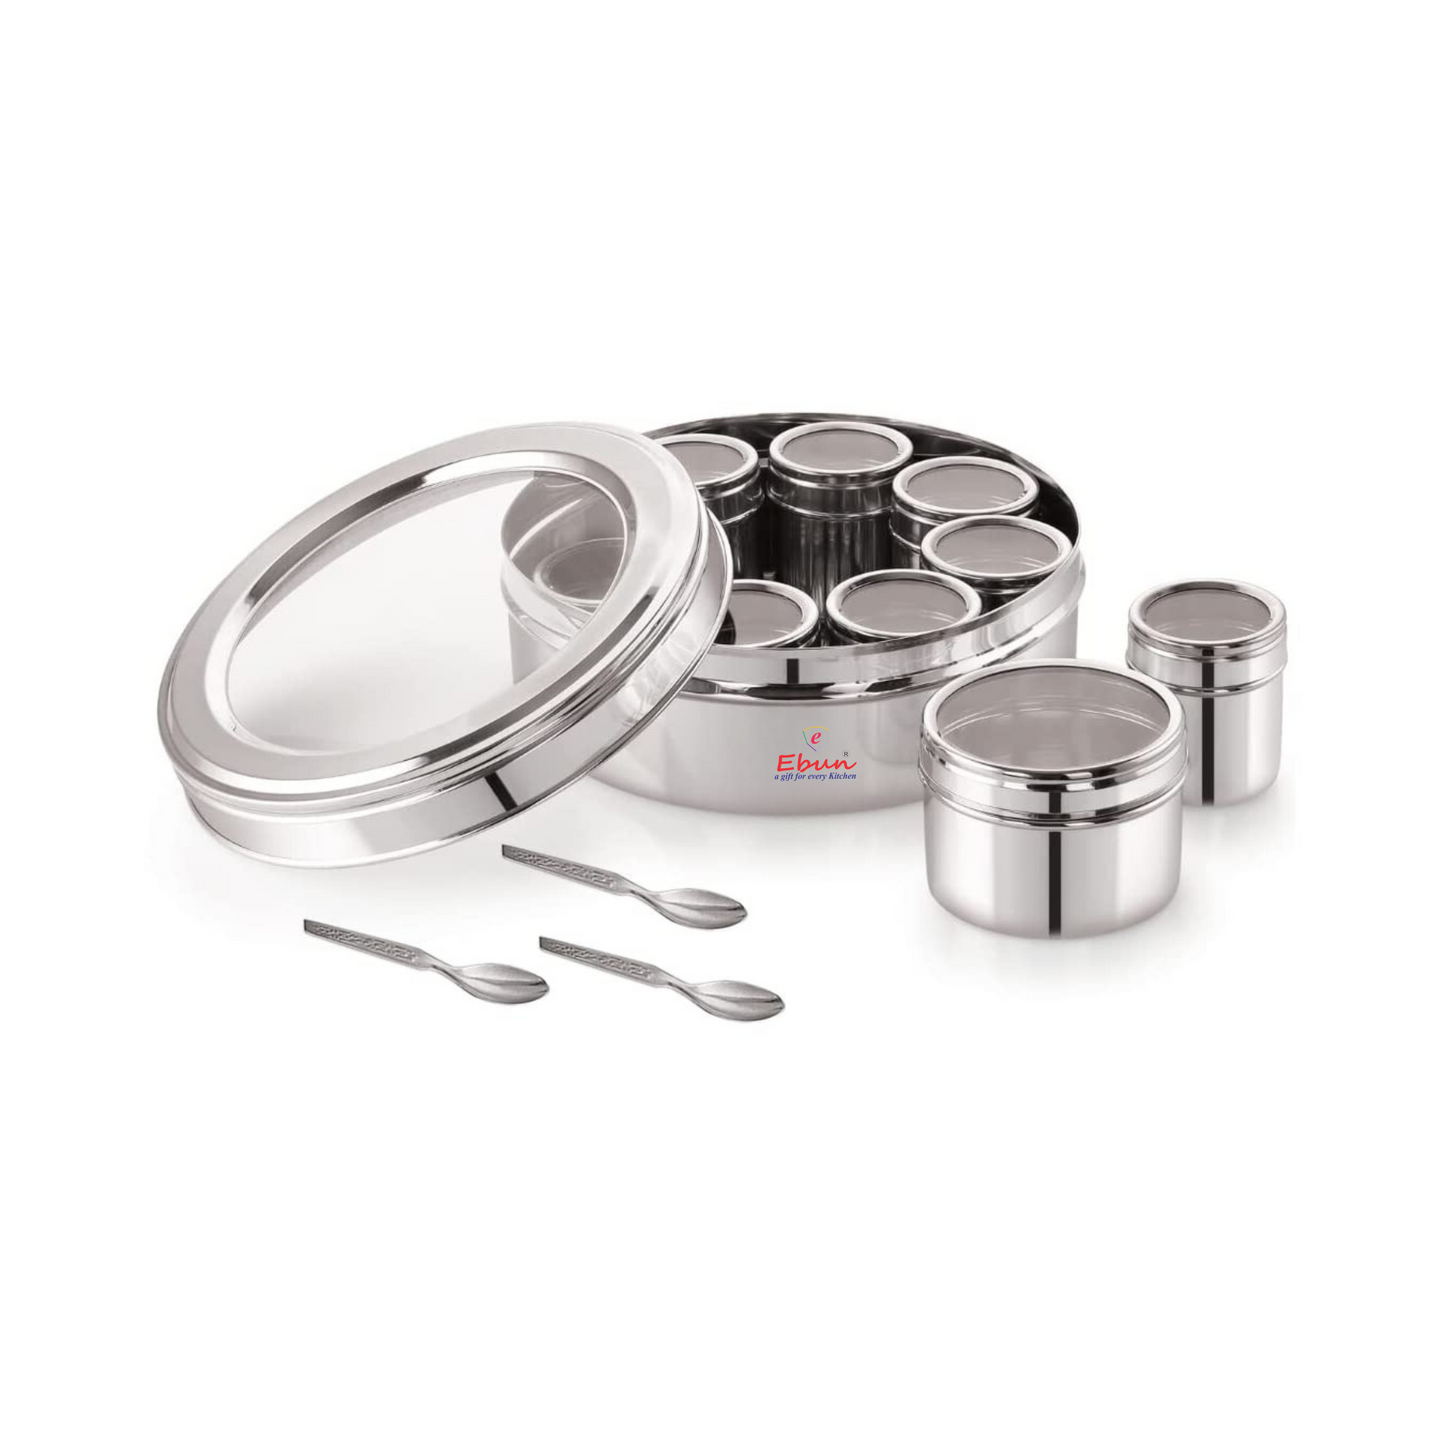 Ebun Stainless Steel Masala Box for Kitchen with 9 Individual See Through Lid Containers and 3 Spoons (2500 Ml)